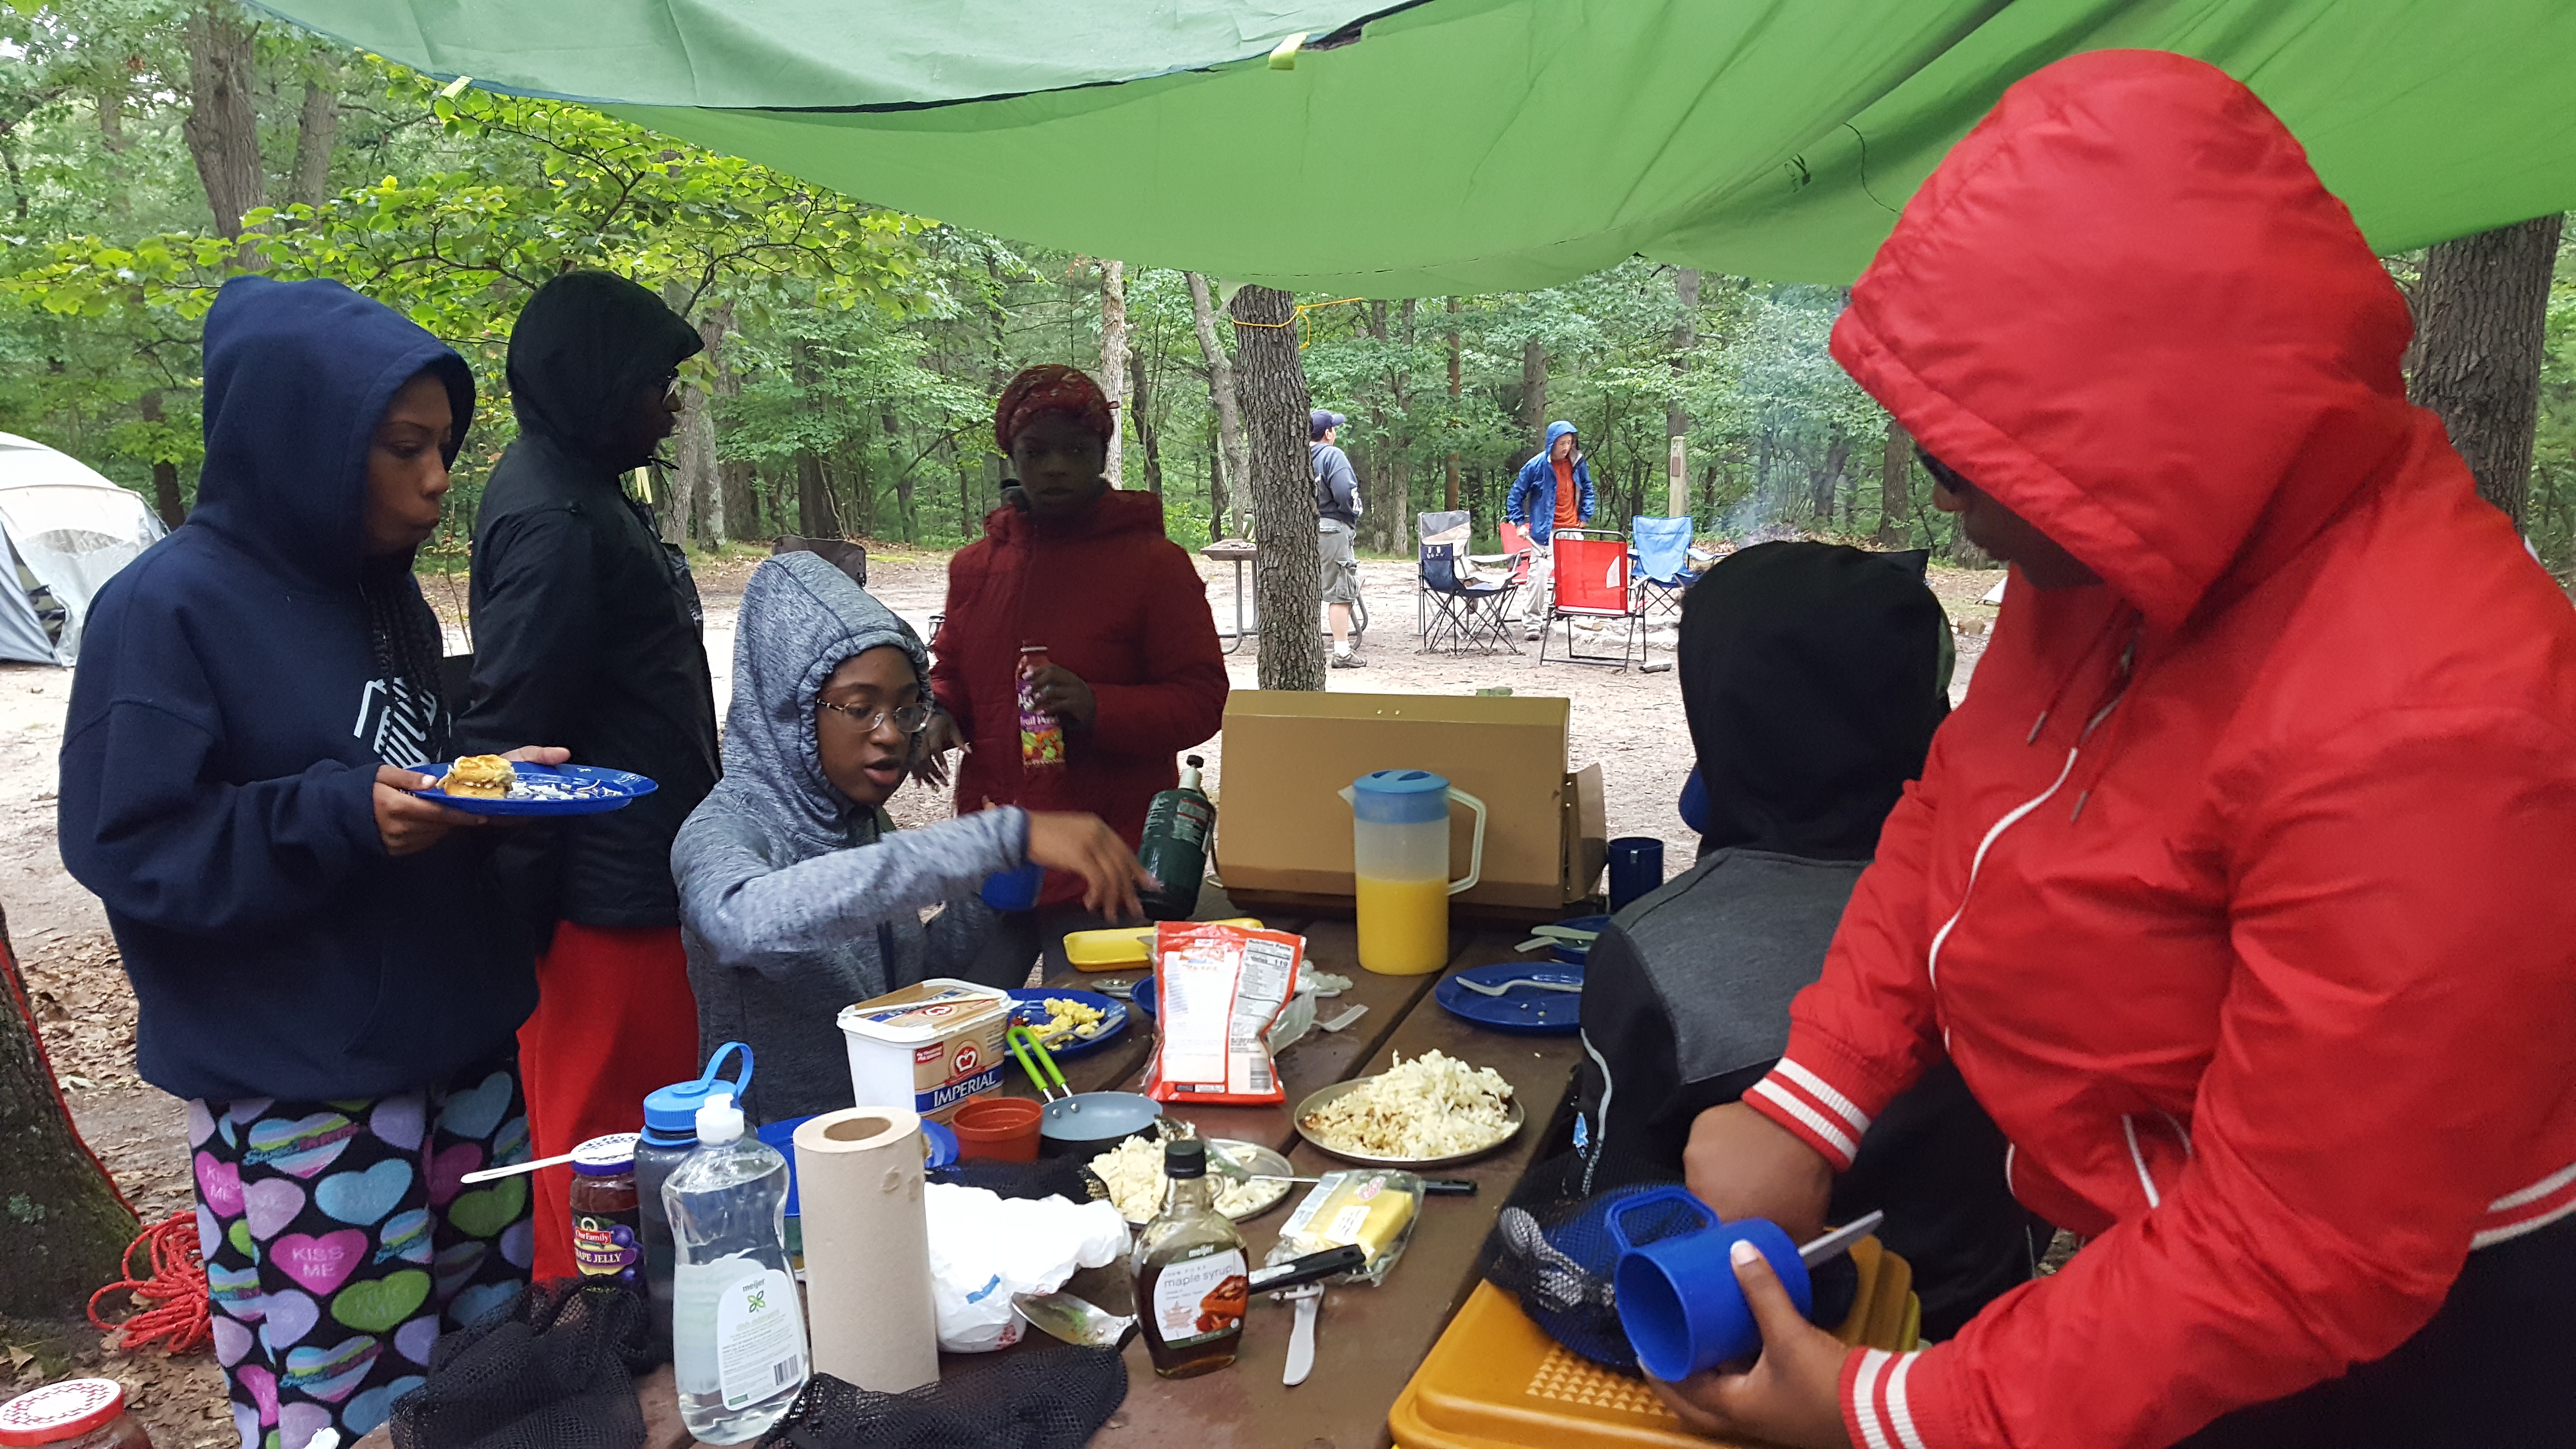 Detroit ICO participants make breakfast at their campsite.